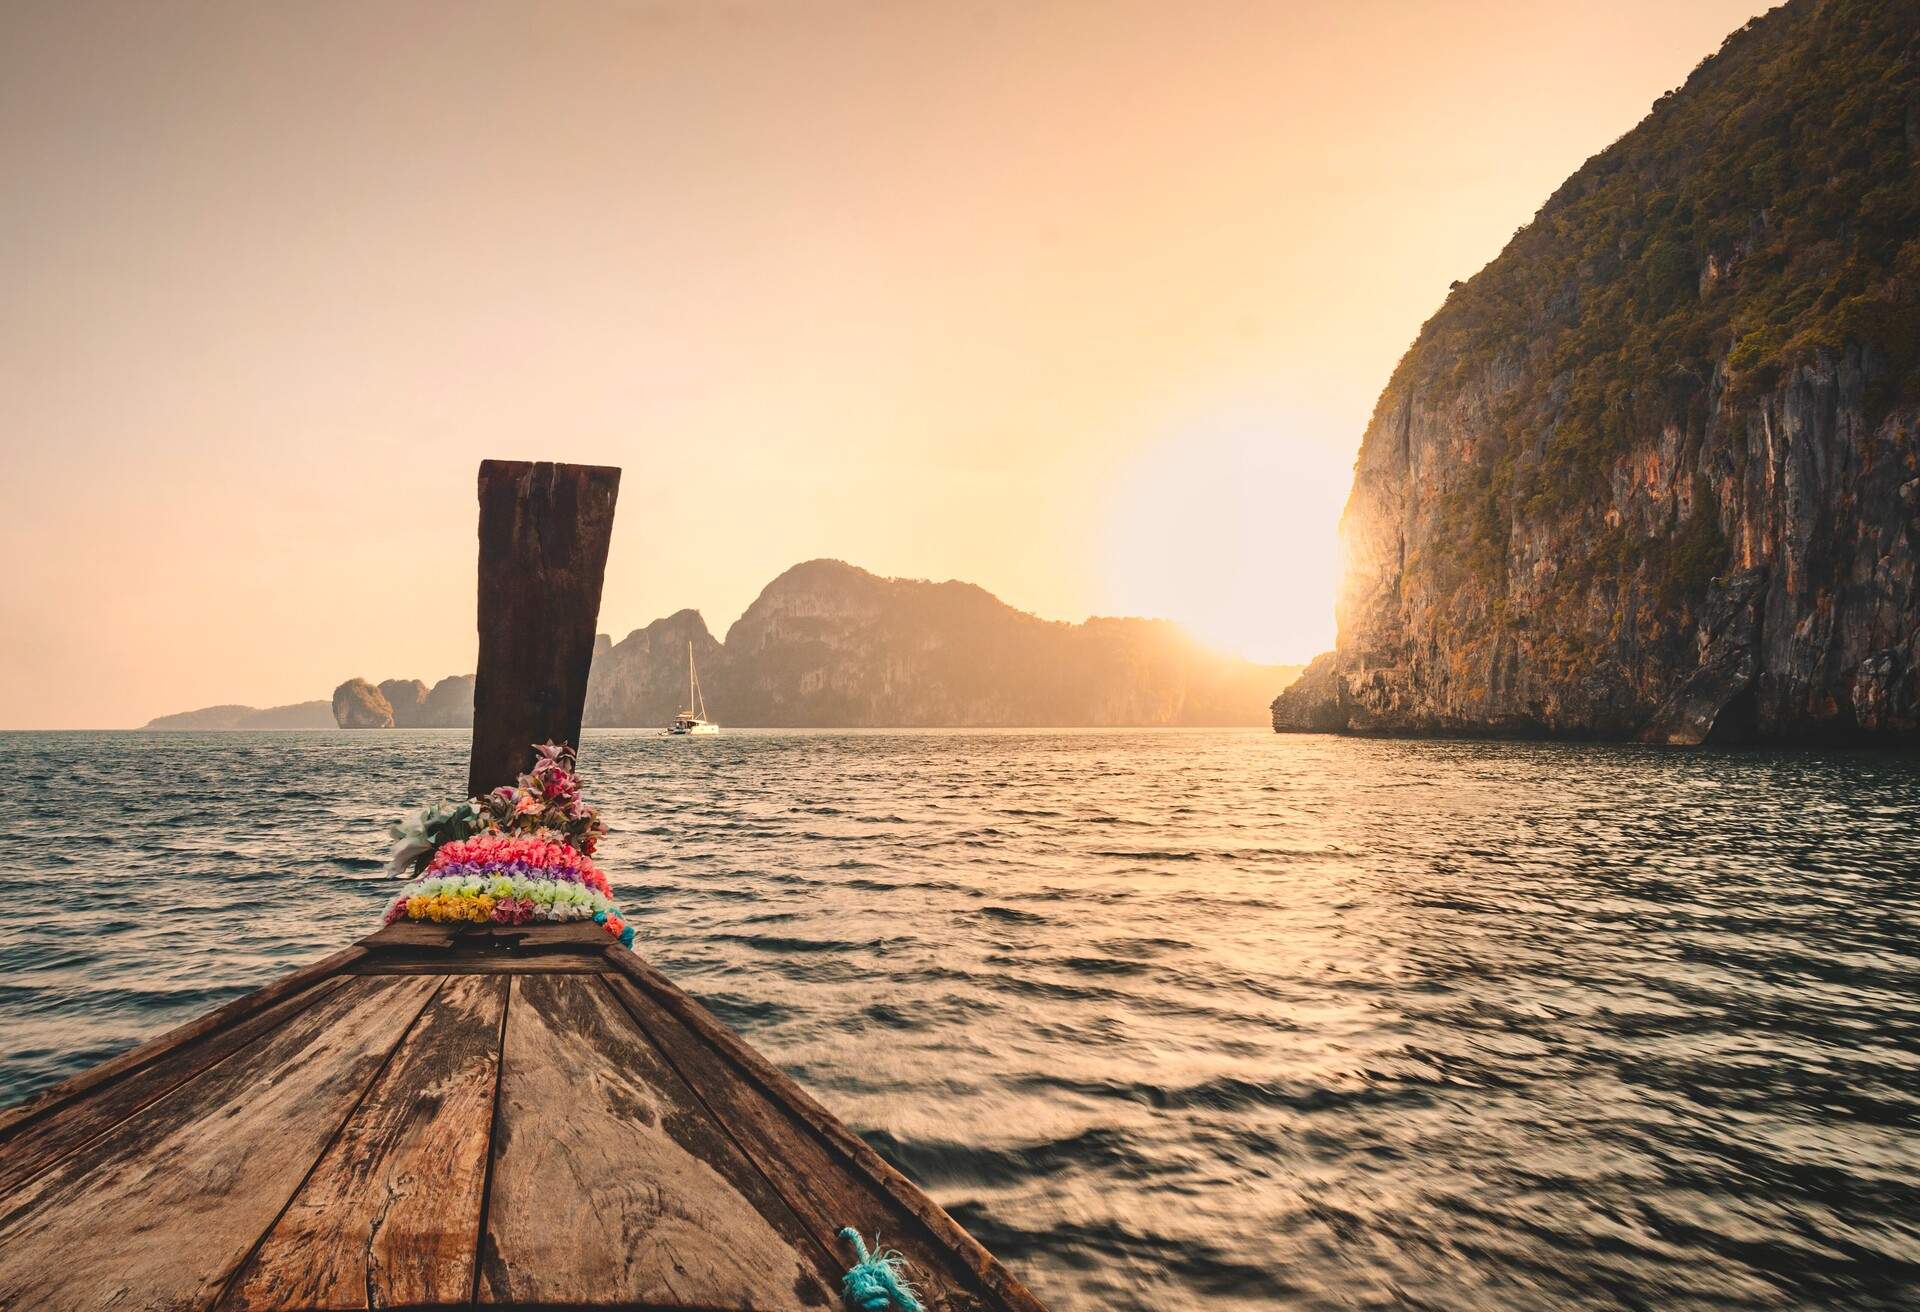 Tourists take Longtail boat to a Snorkel Spot near Phi Phi islands During Sunrise, Krabi Province, South, Thailand, Asia